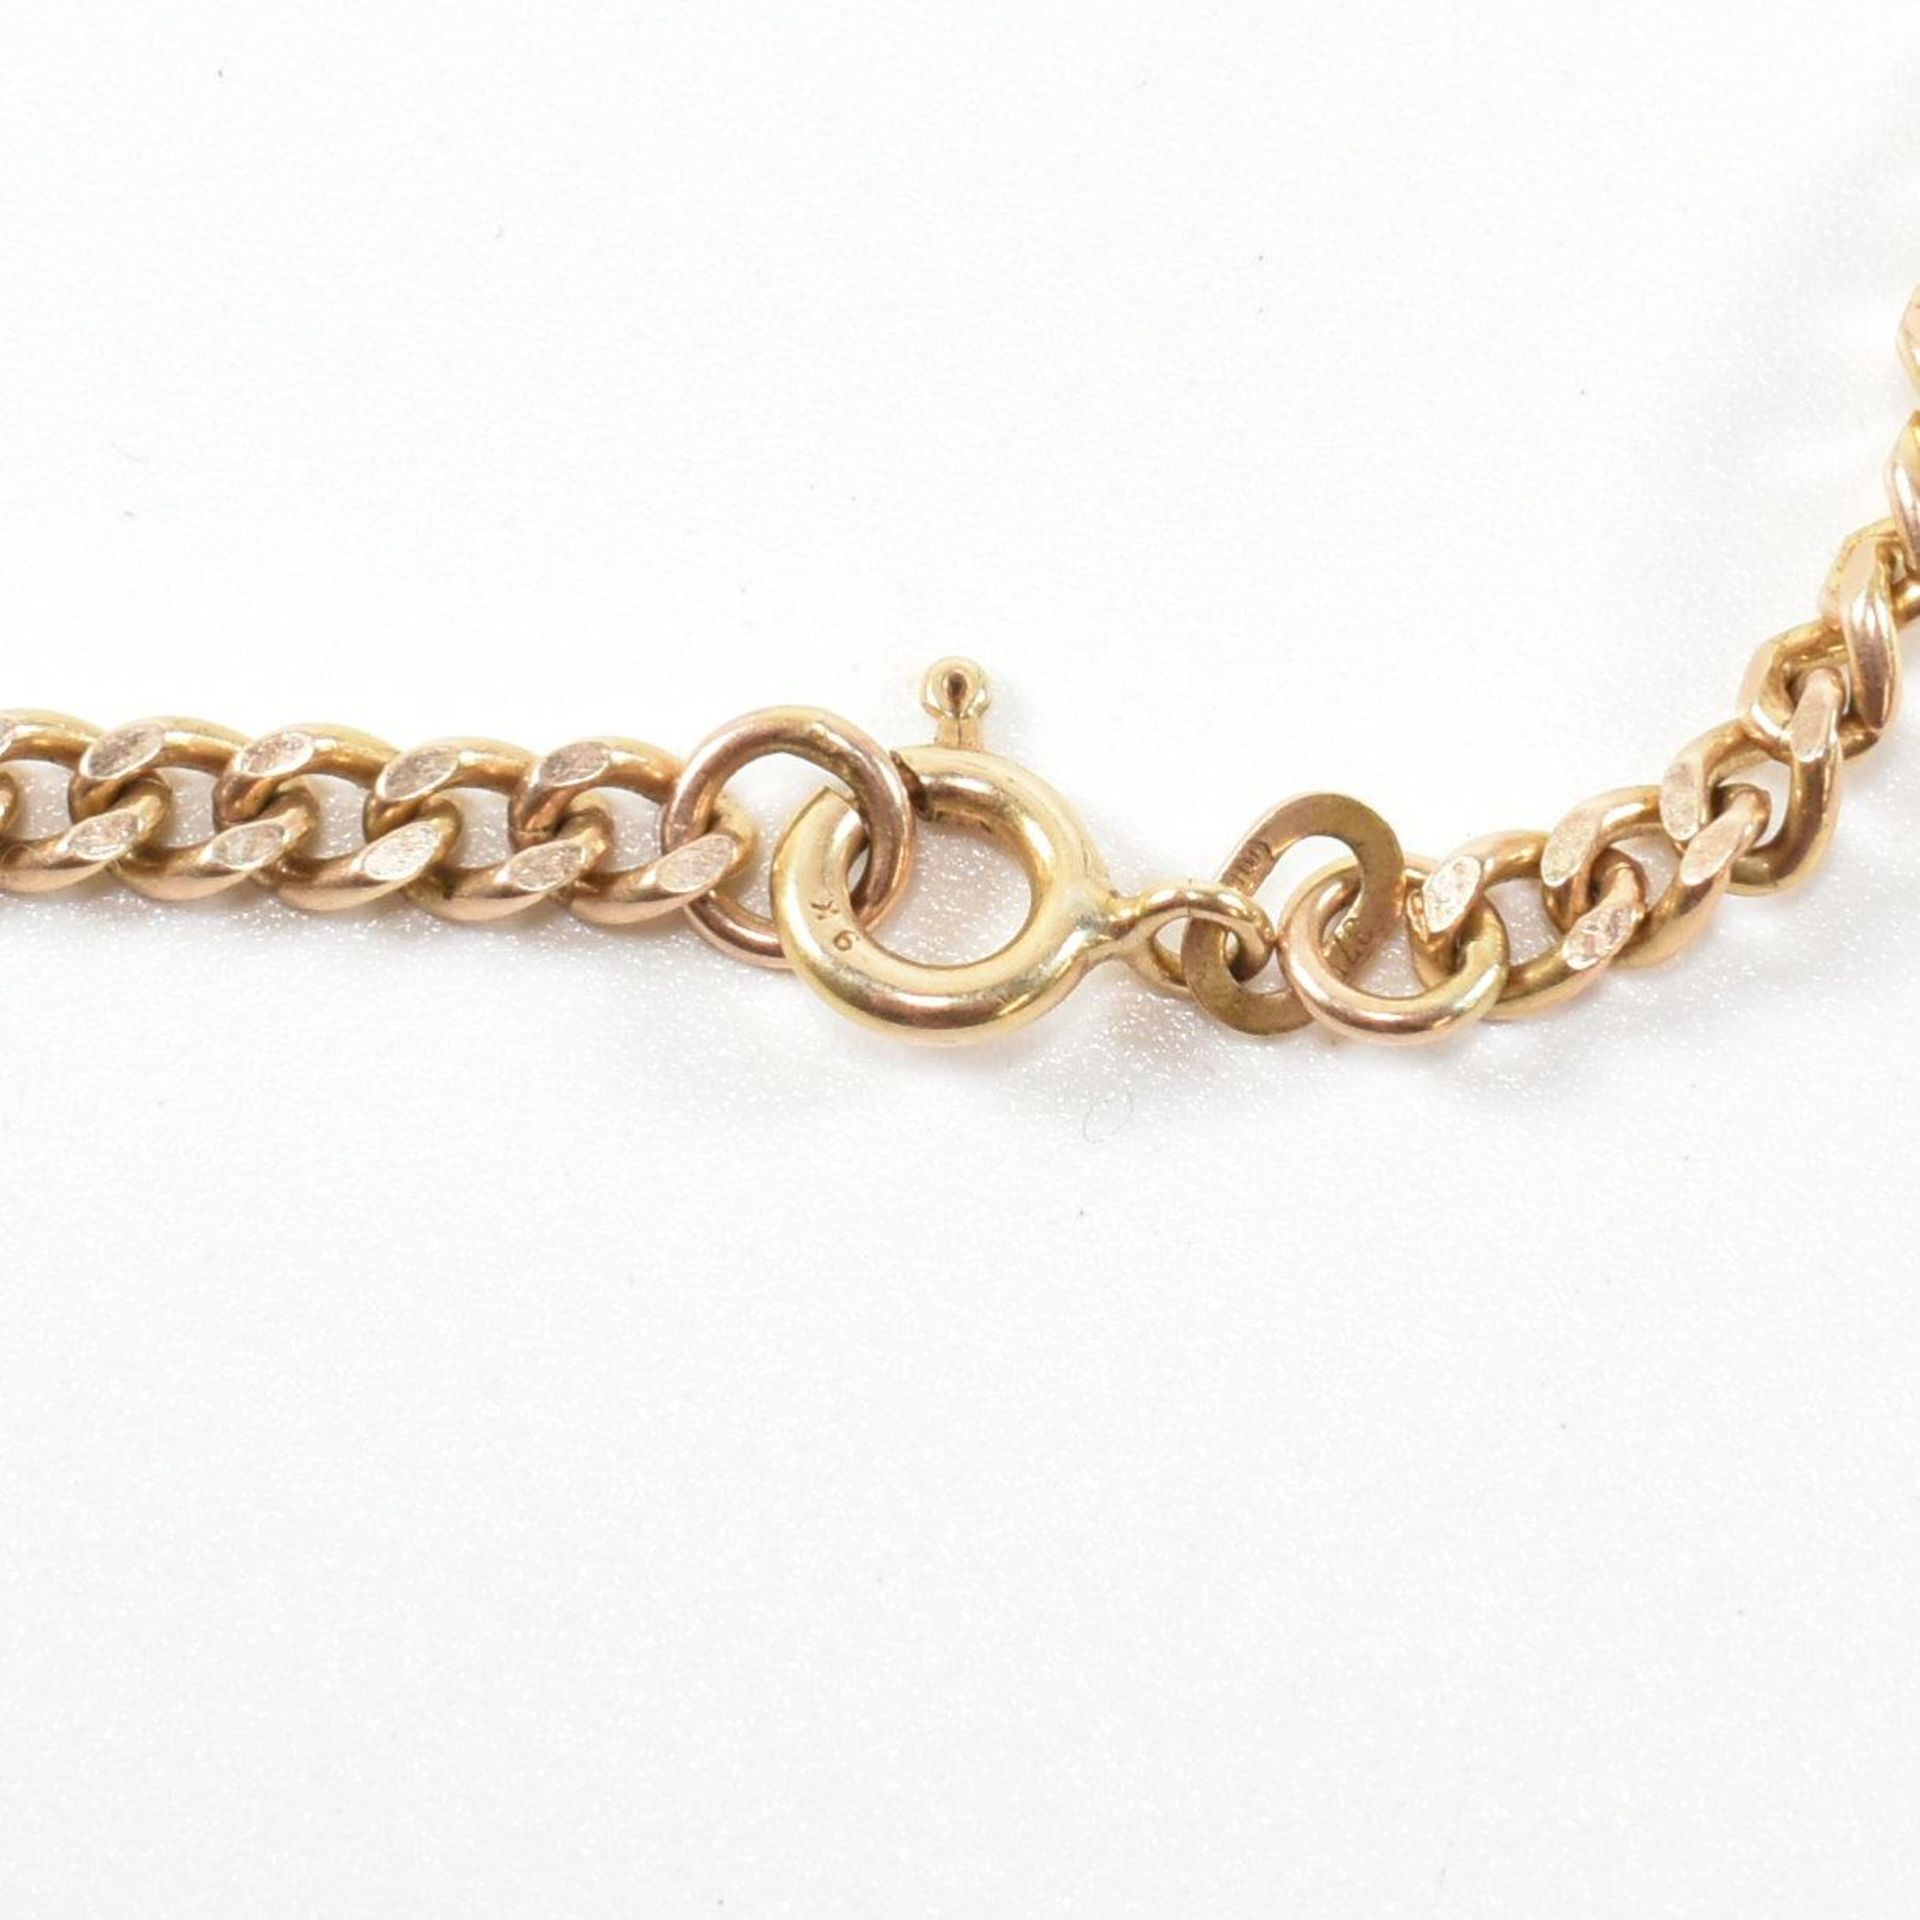 HALLMARKED 9CT GOLD CURB LINK CHAIN NECKLACE - Image 5 of 6